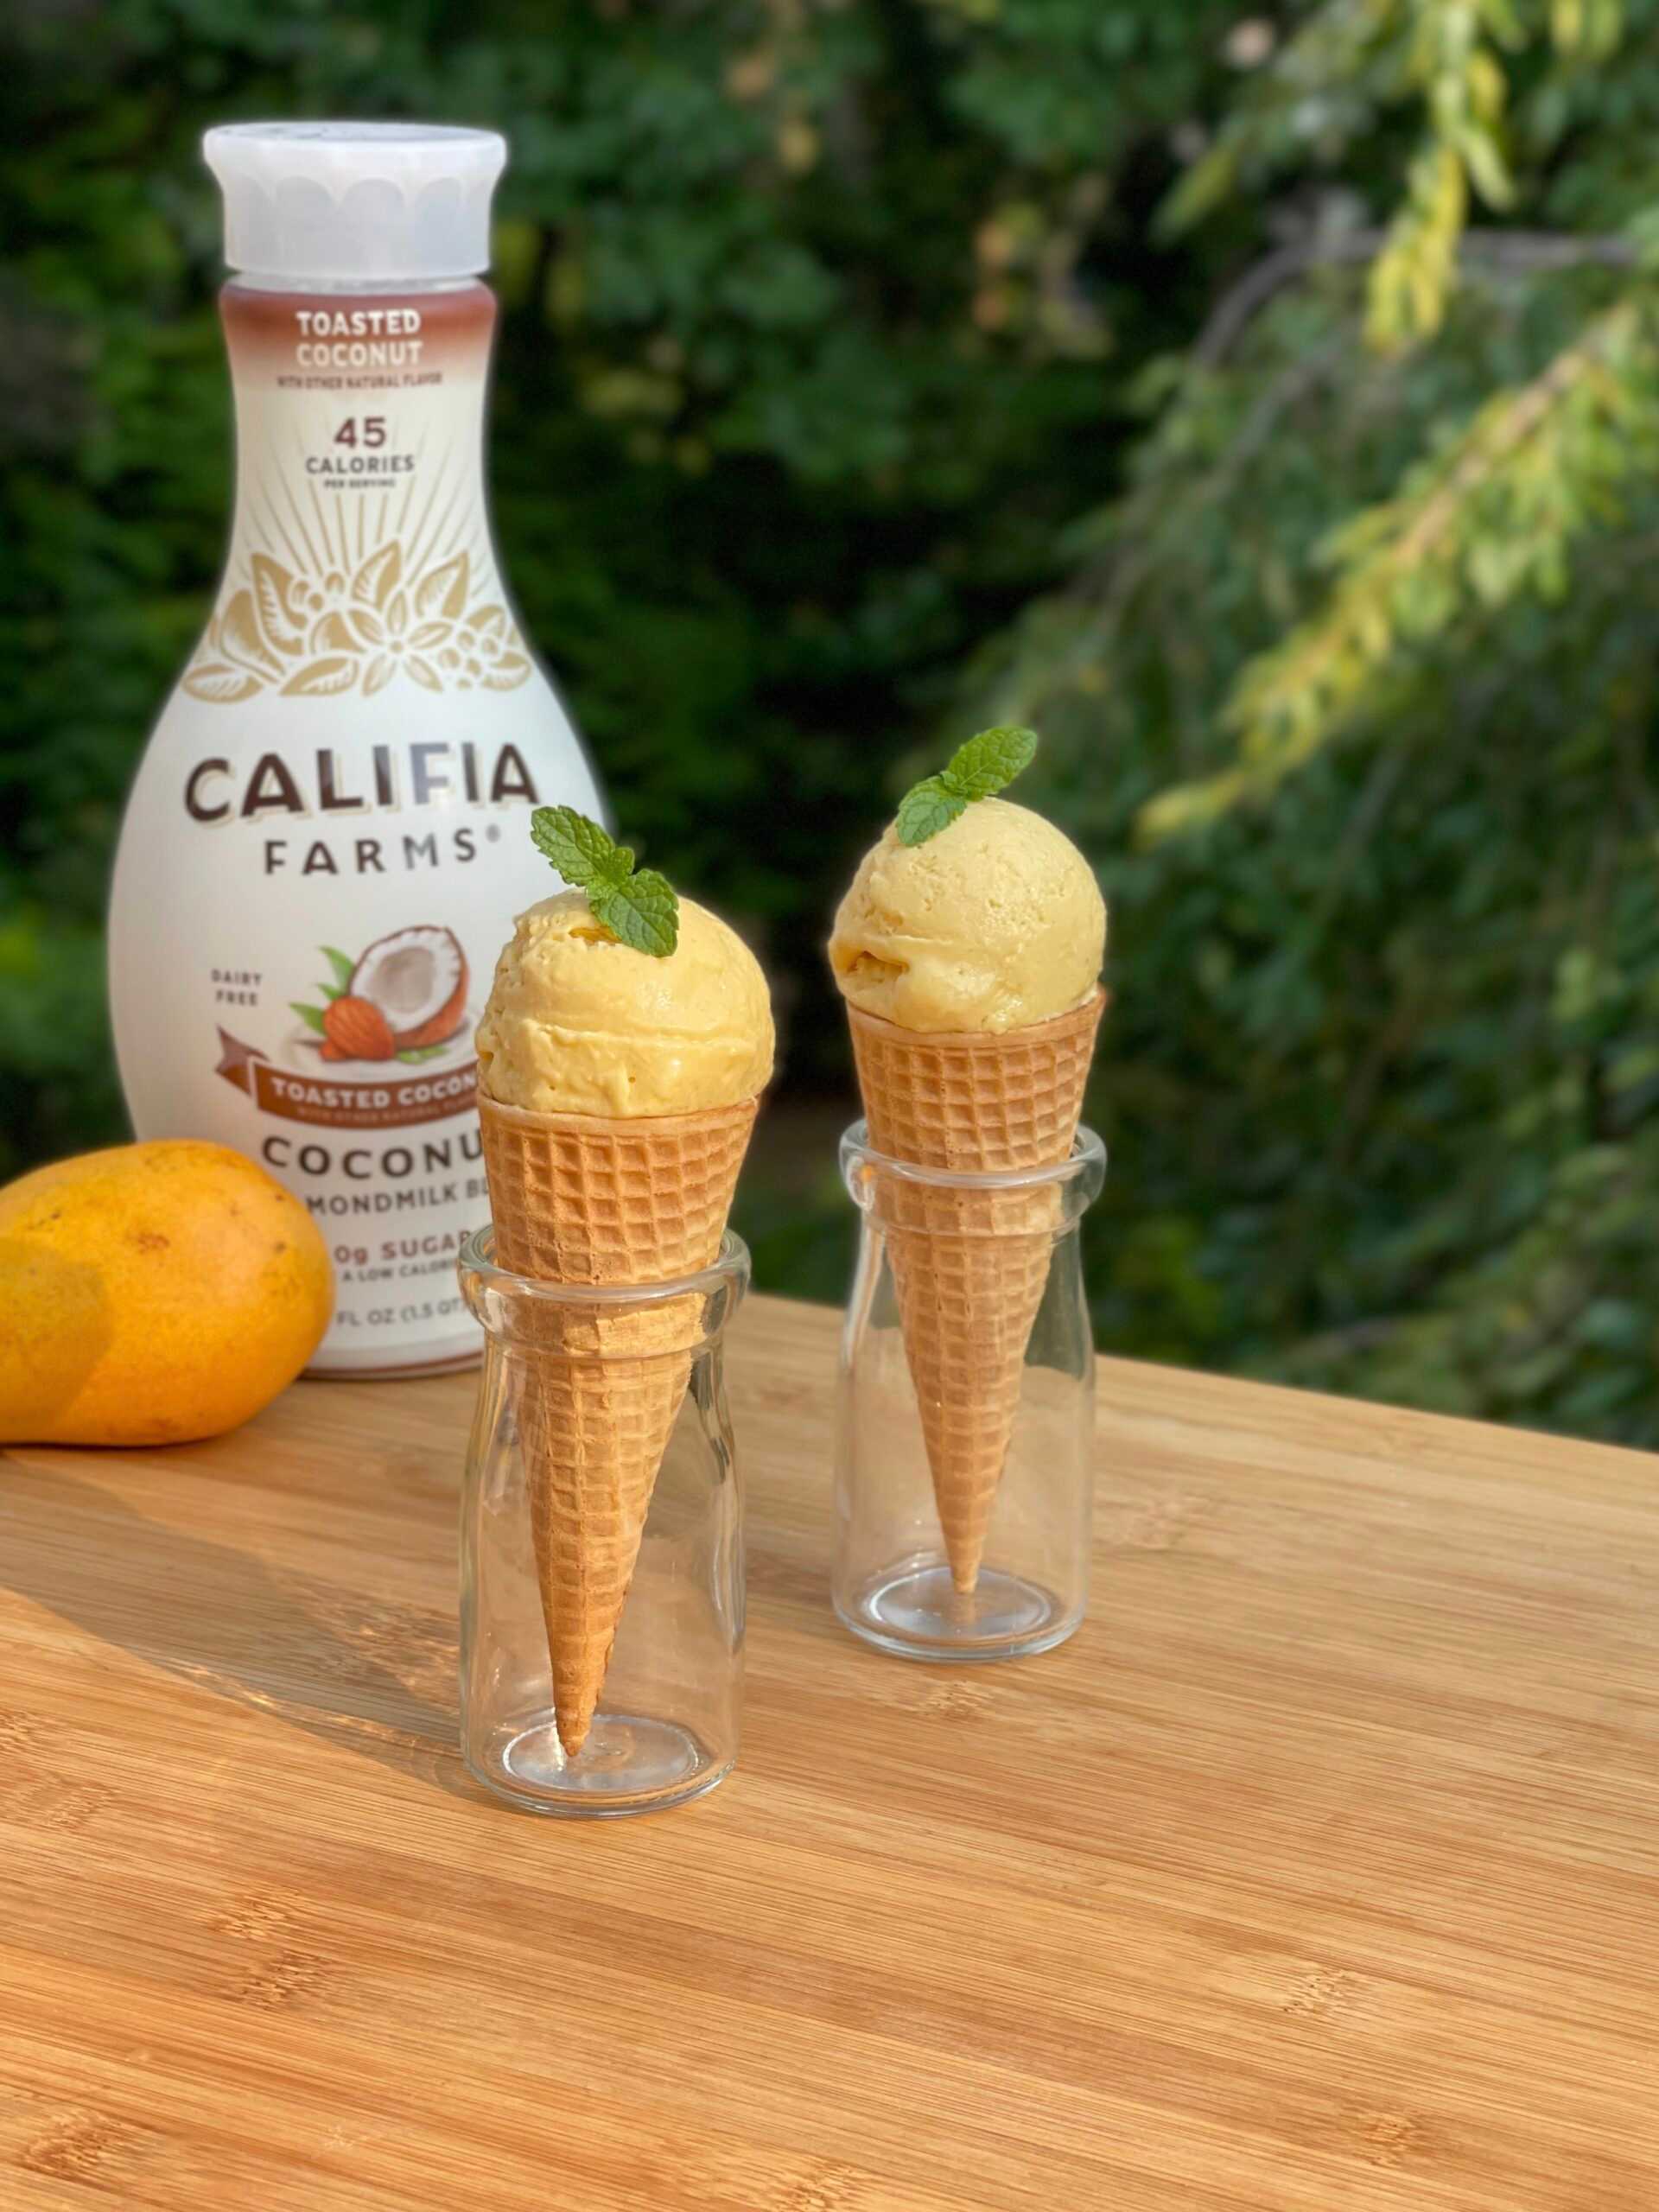 Small cones with scoops of mango ice cream sit at the center of the image, with a bottle of Califia Farms Toasted Coconut Almondmilk in the background.